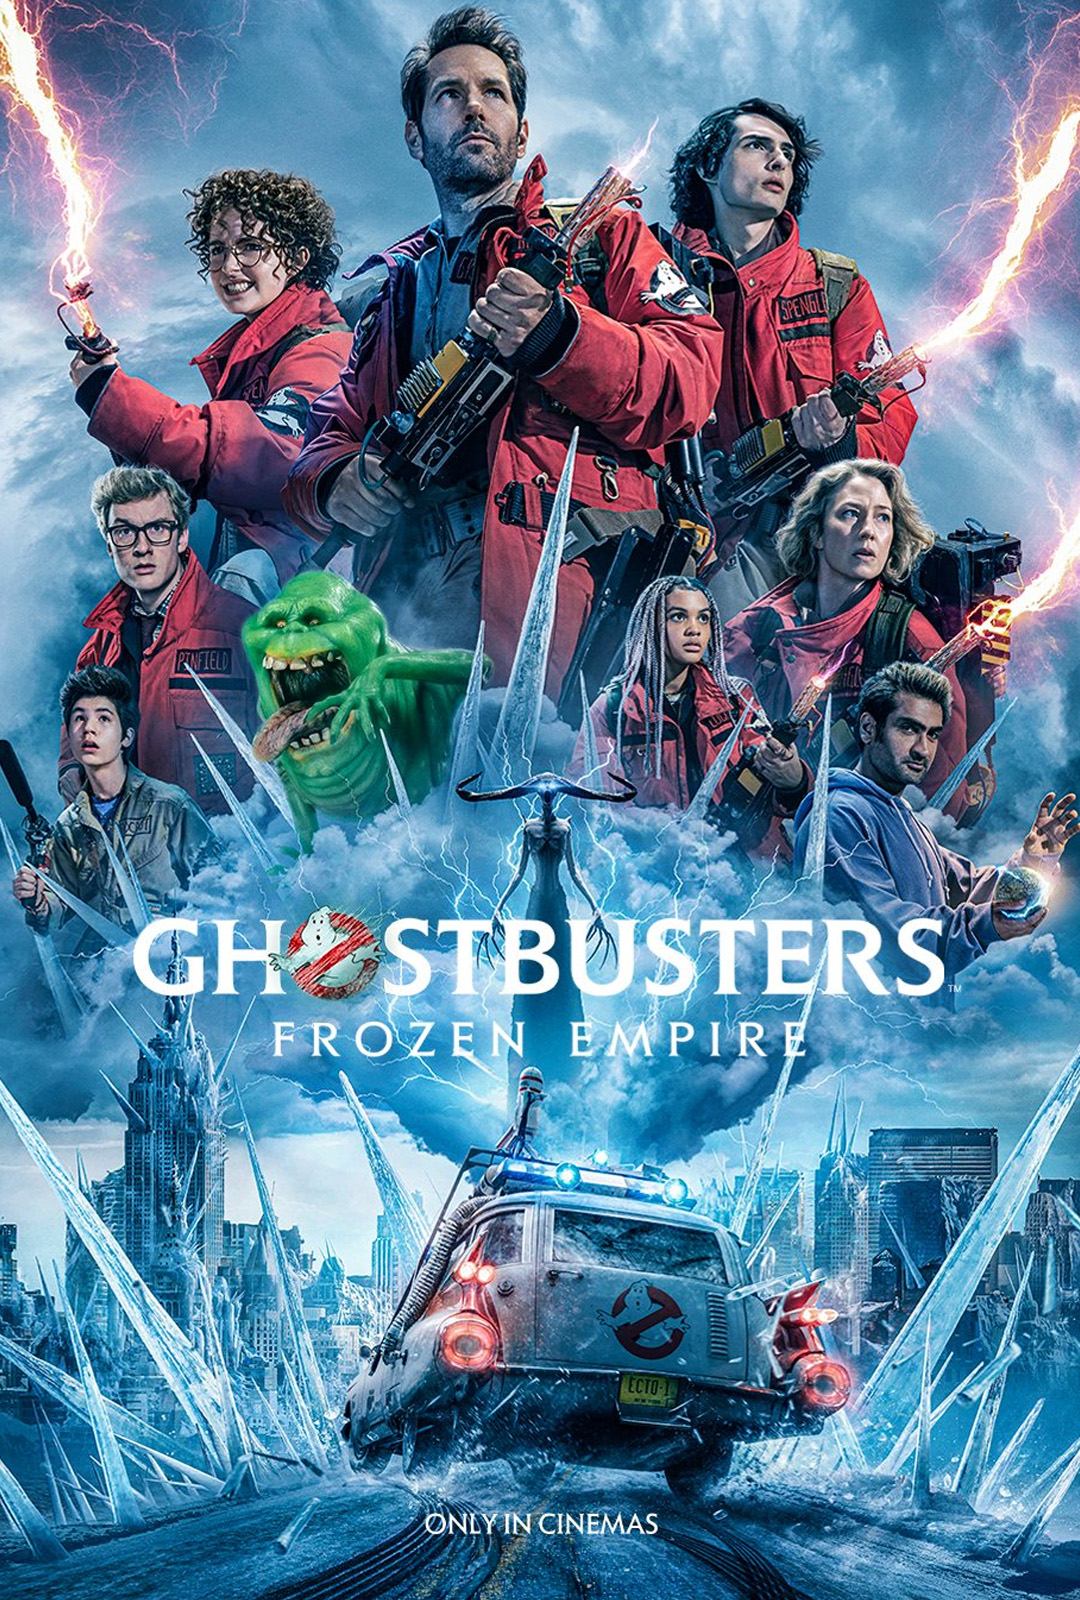 Movie Poster: Ghostbusters: Frozen Empire